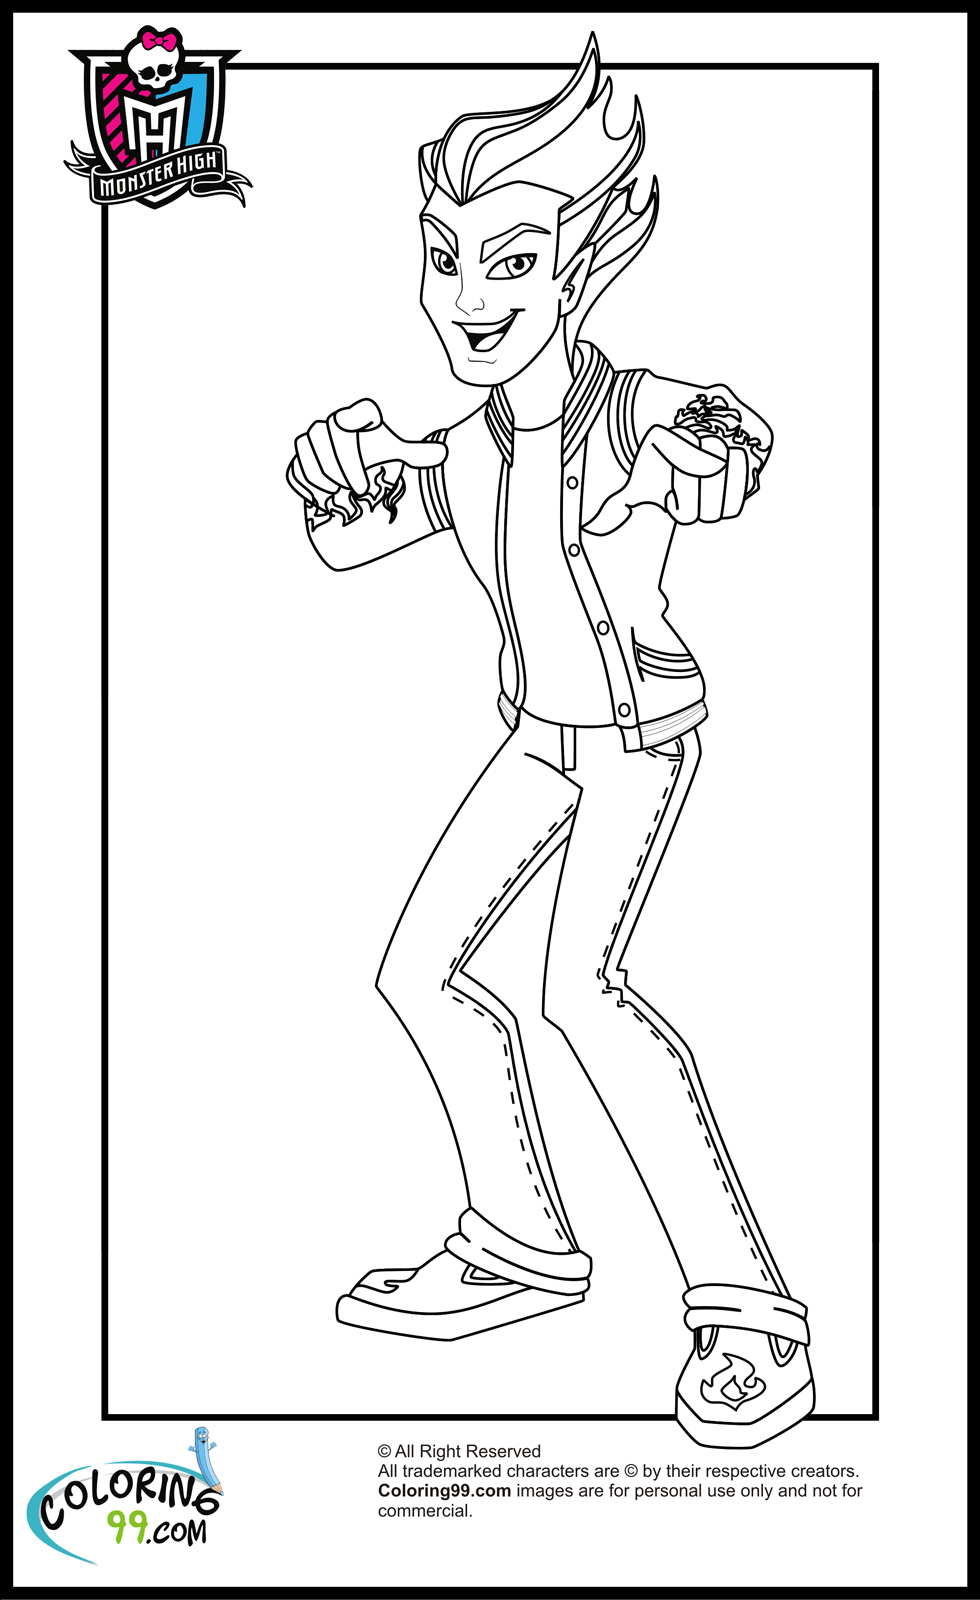 Monster High Boys Coloring Pages | Team colors